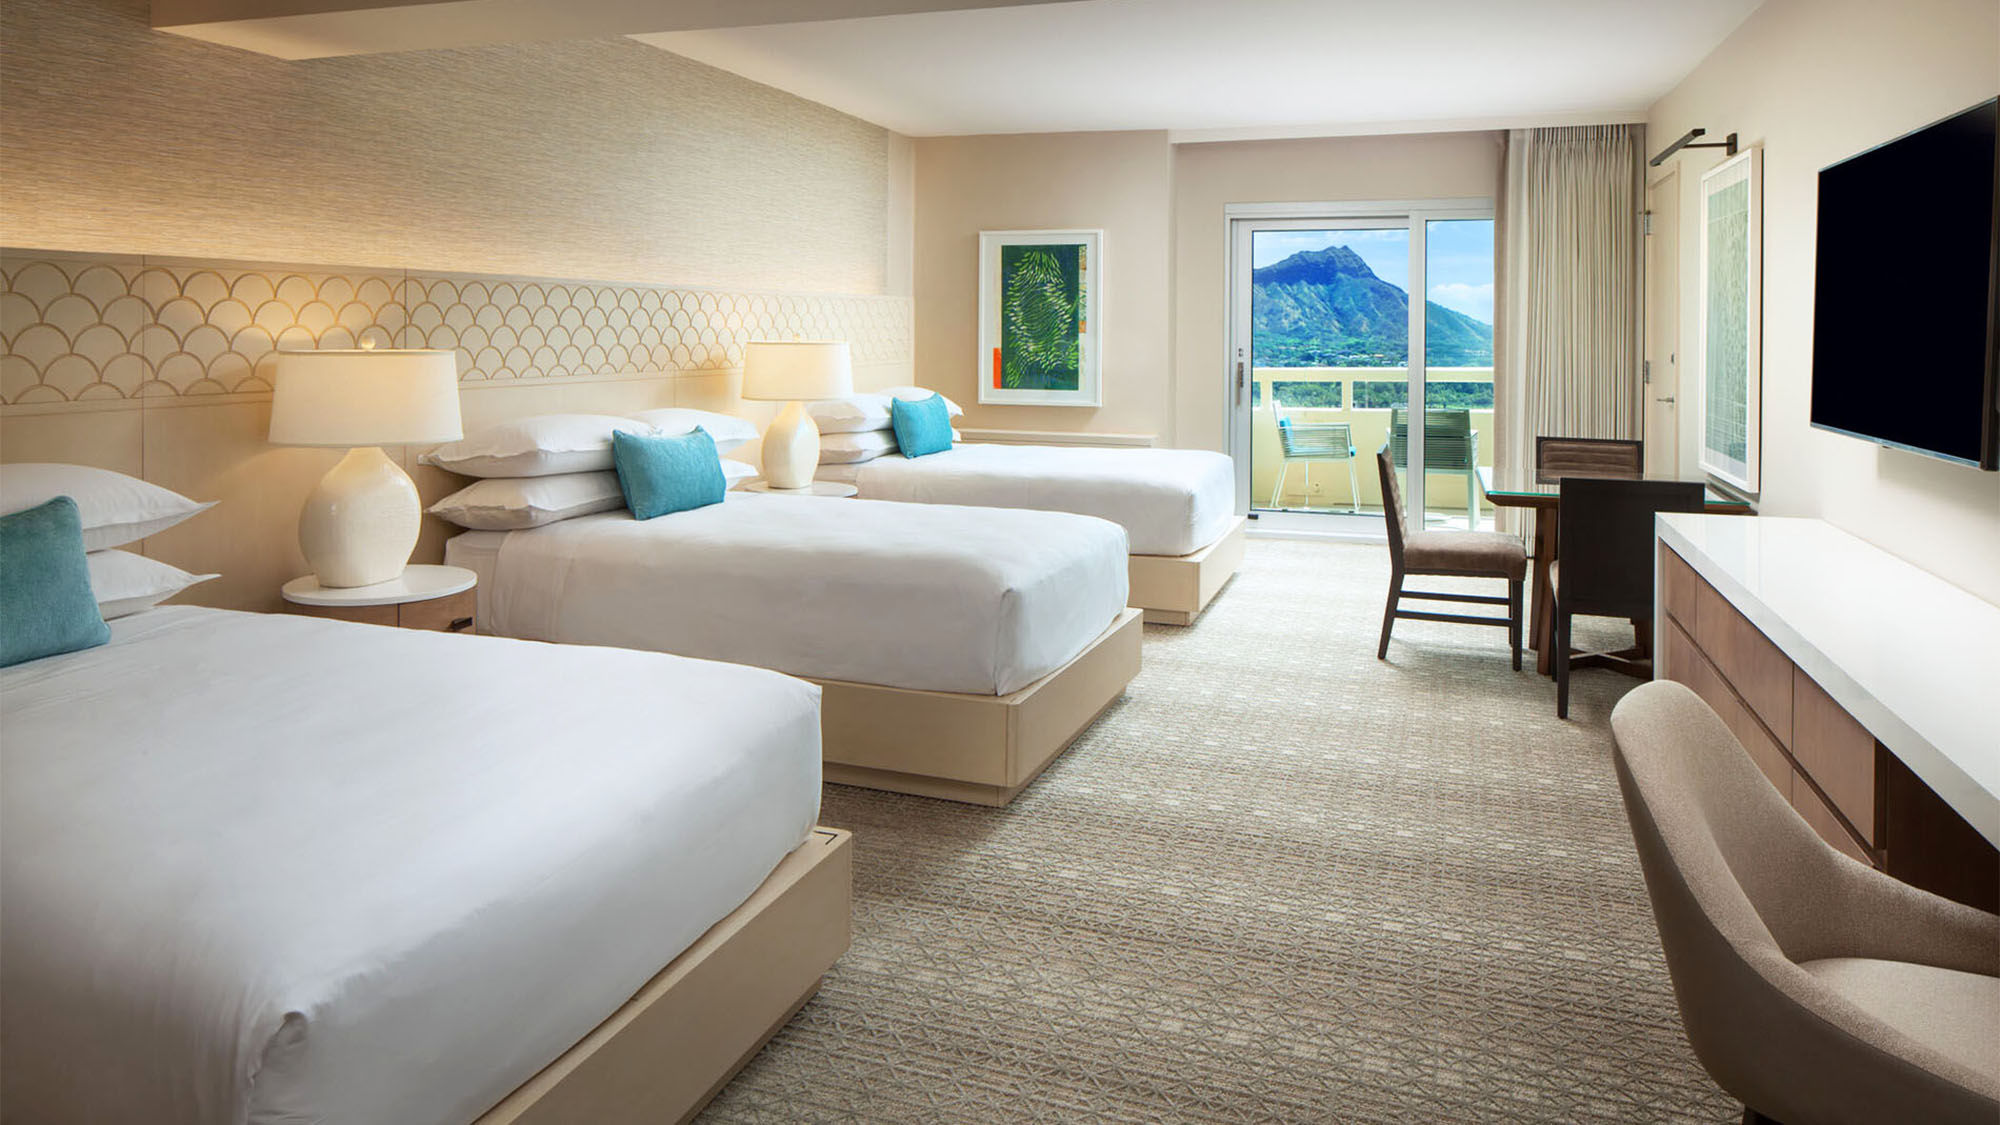 A Large Luxury guestroom at the Sheraton Waikiki features three double beds and an ocean view.